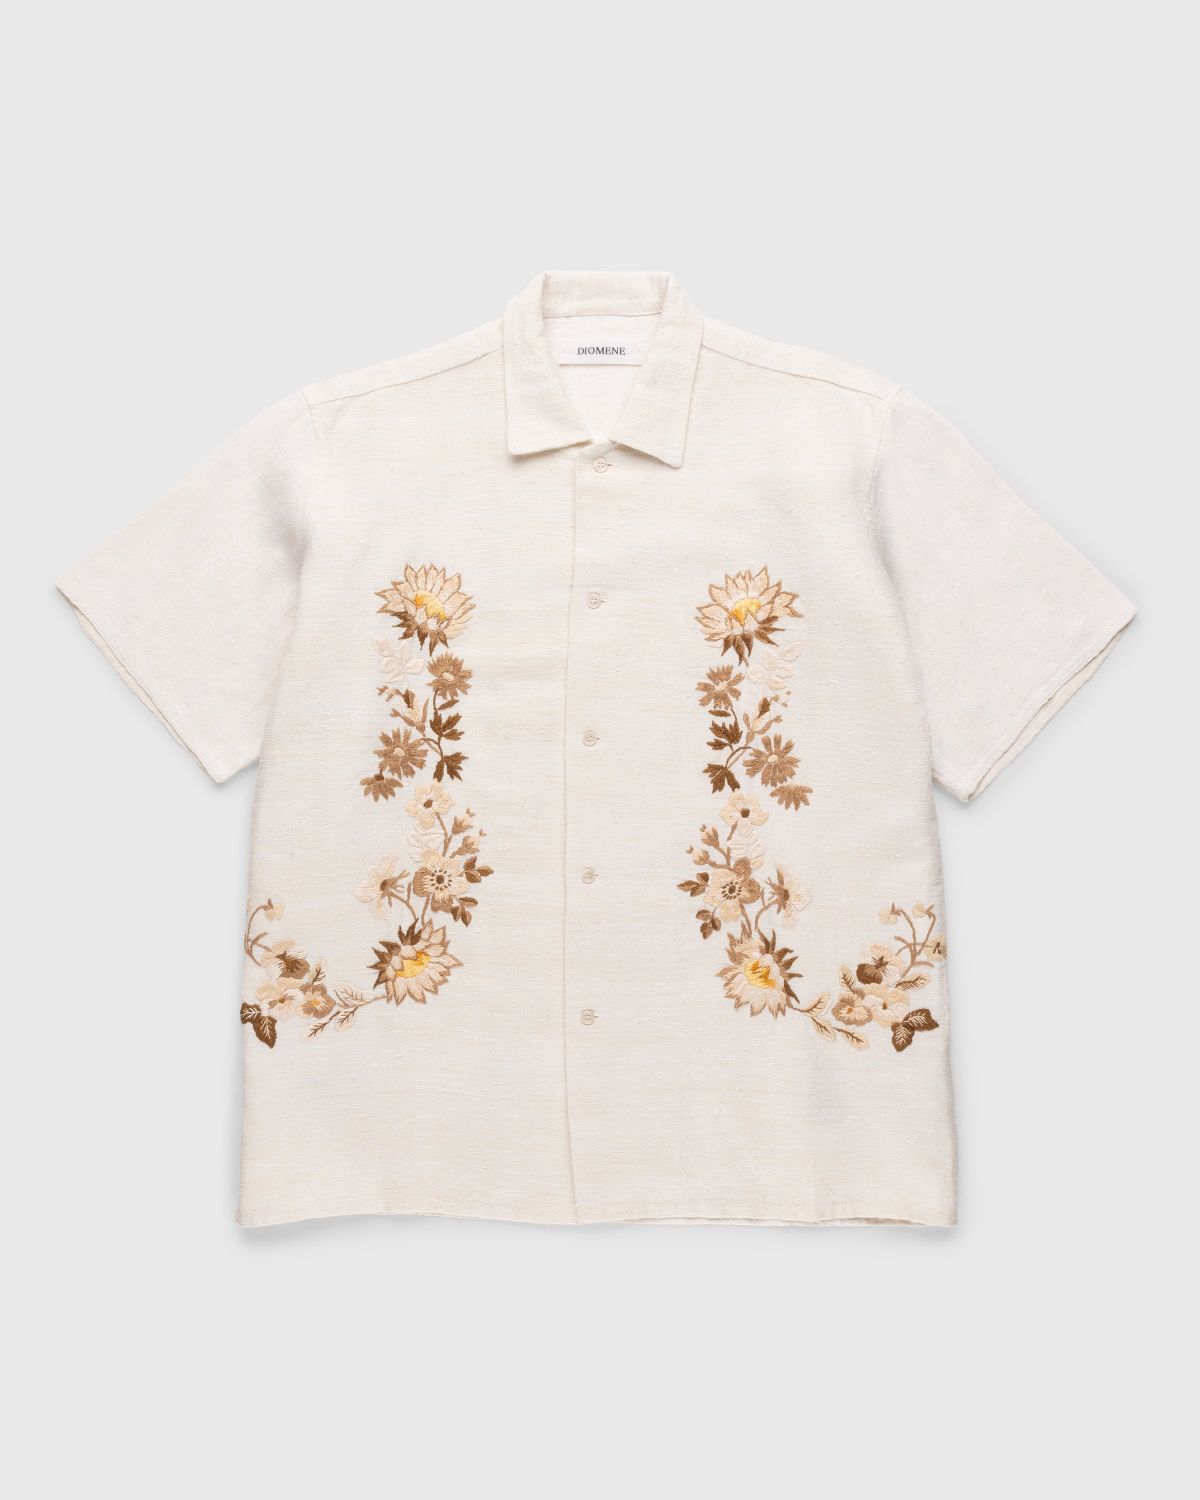 Diomene by Damir Doma – Embroidered Vacation Shirt Cream - Shirts - White - Image 1